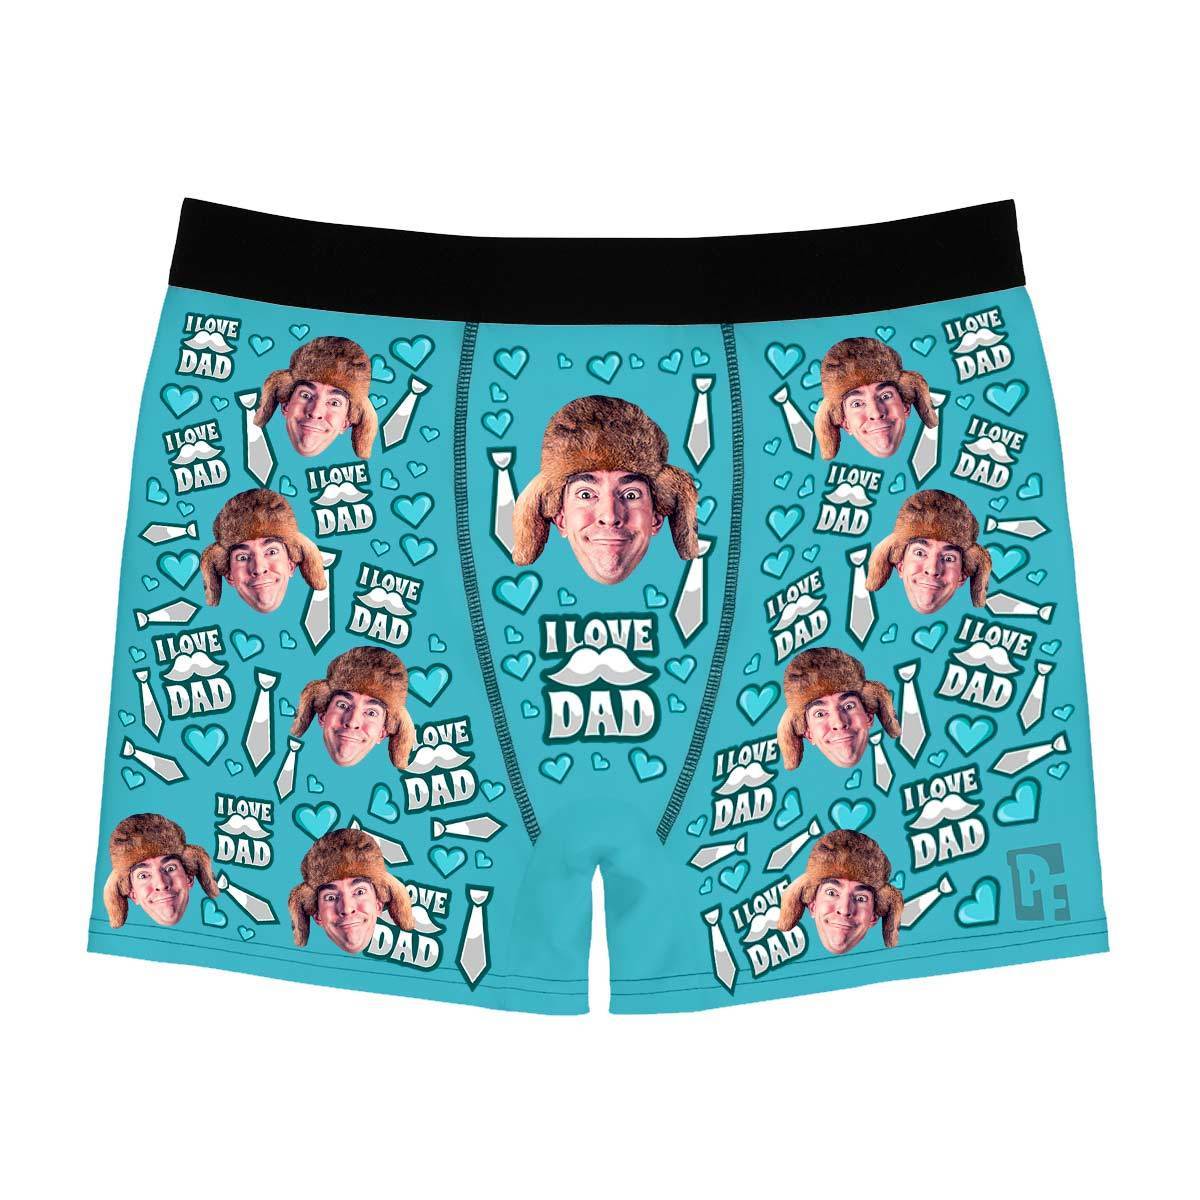 Blue Love dad men's boxer briefs personalized with photo printed on them